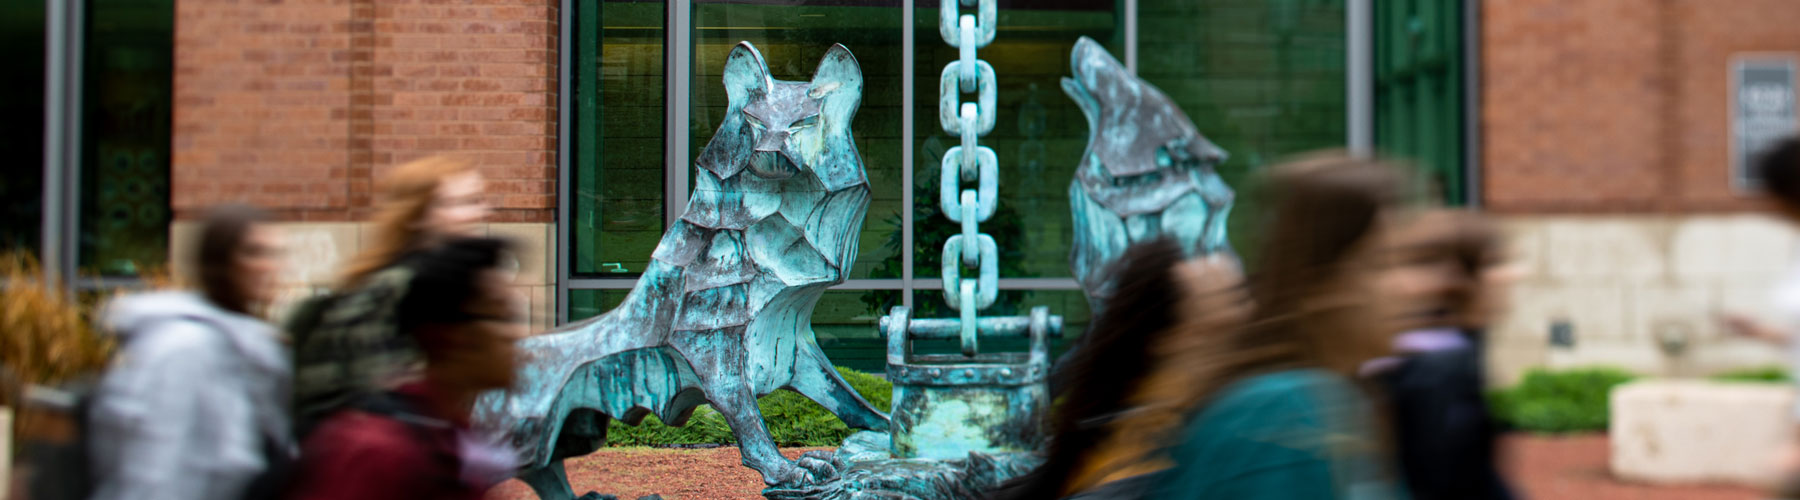 Loyola University Chicago students walking by the Lobo statue on Lake Shore Campus